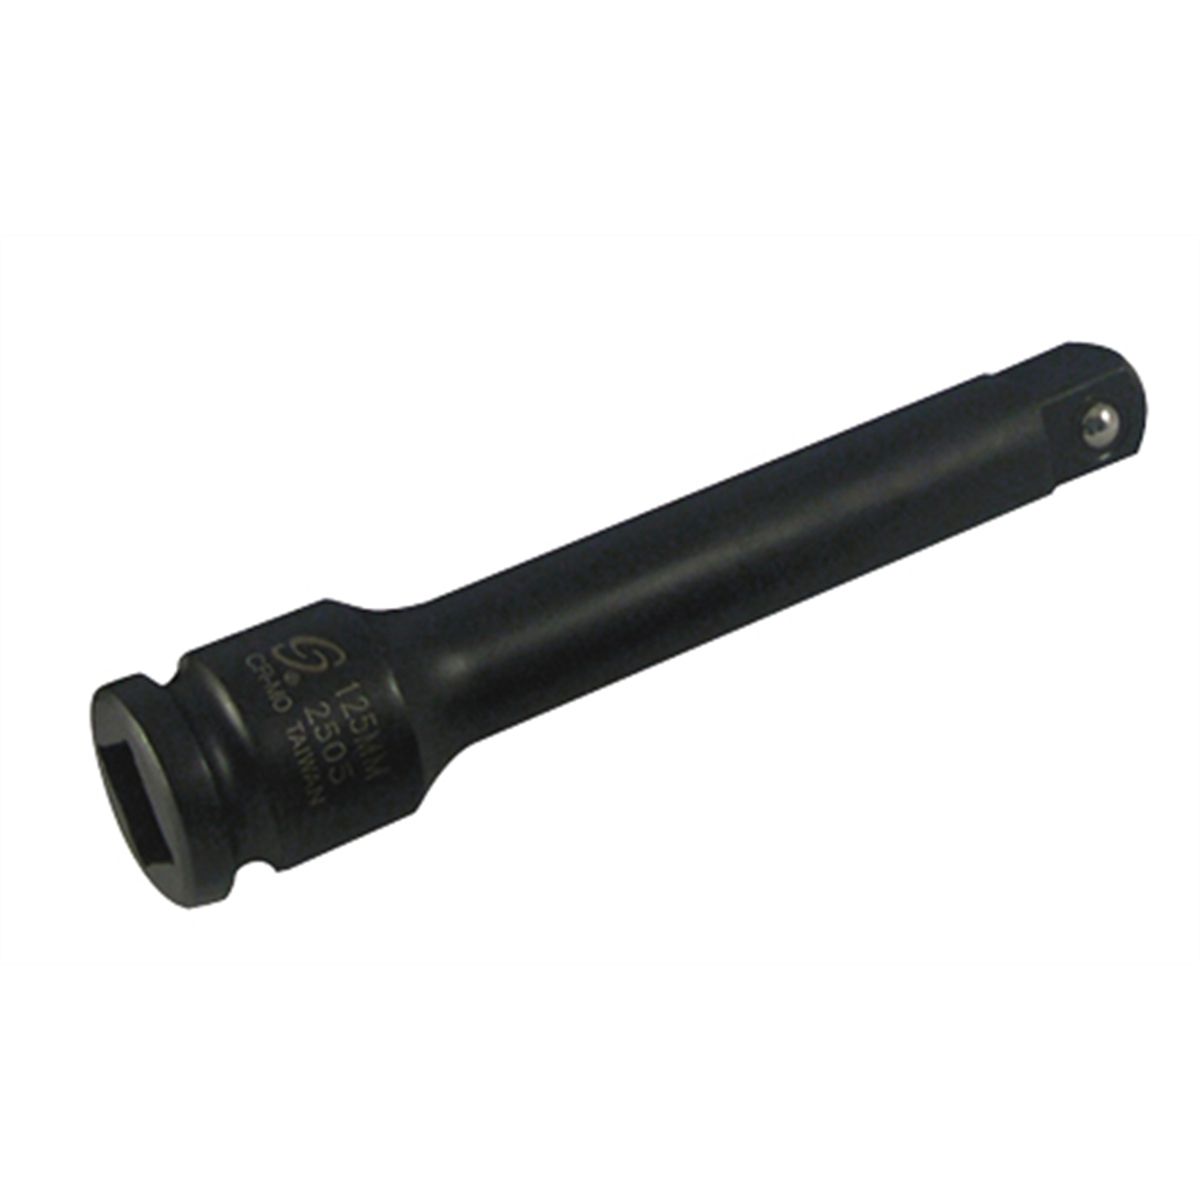 1/2 Inch Drive Impact Socket Extension 5 Inch L...